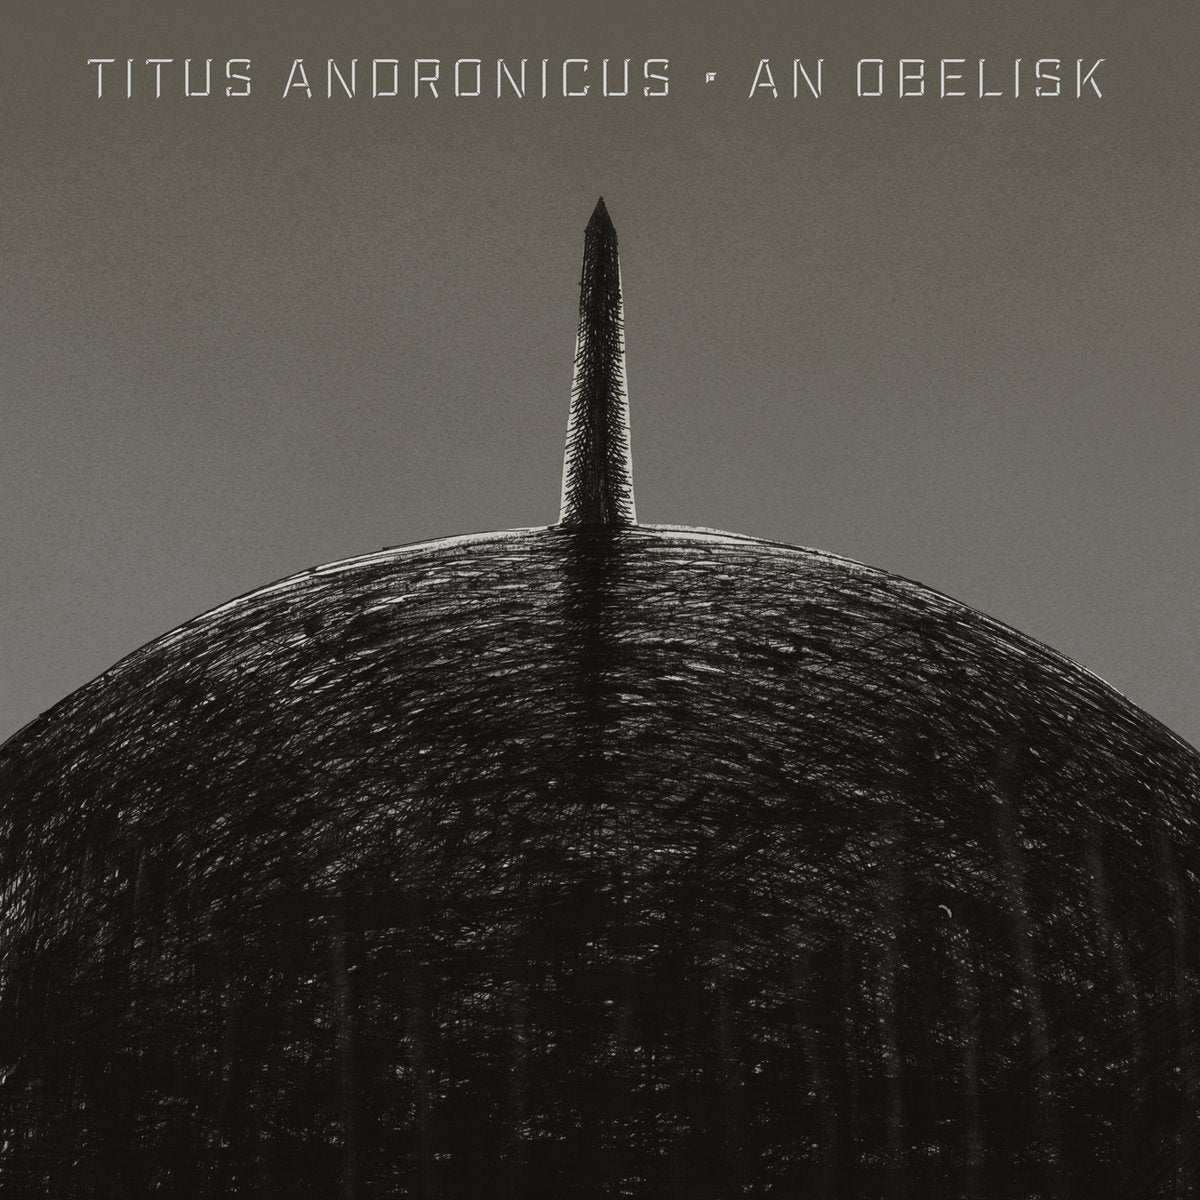 Titus Andronicus—An Obelisk